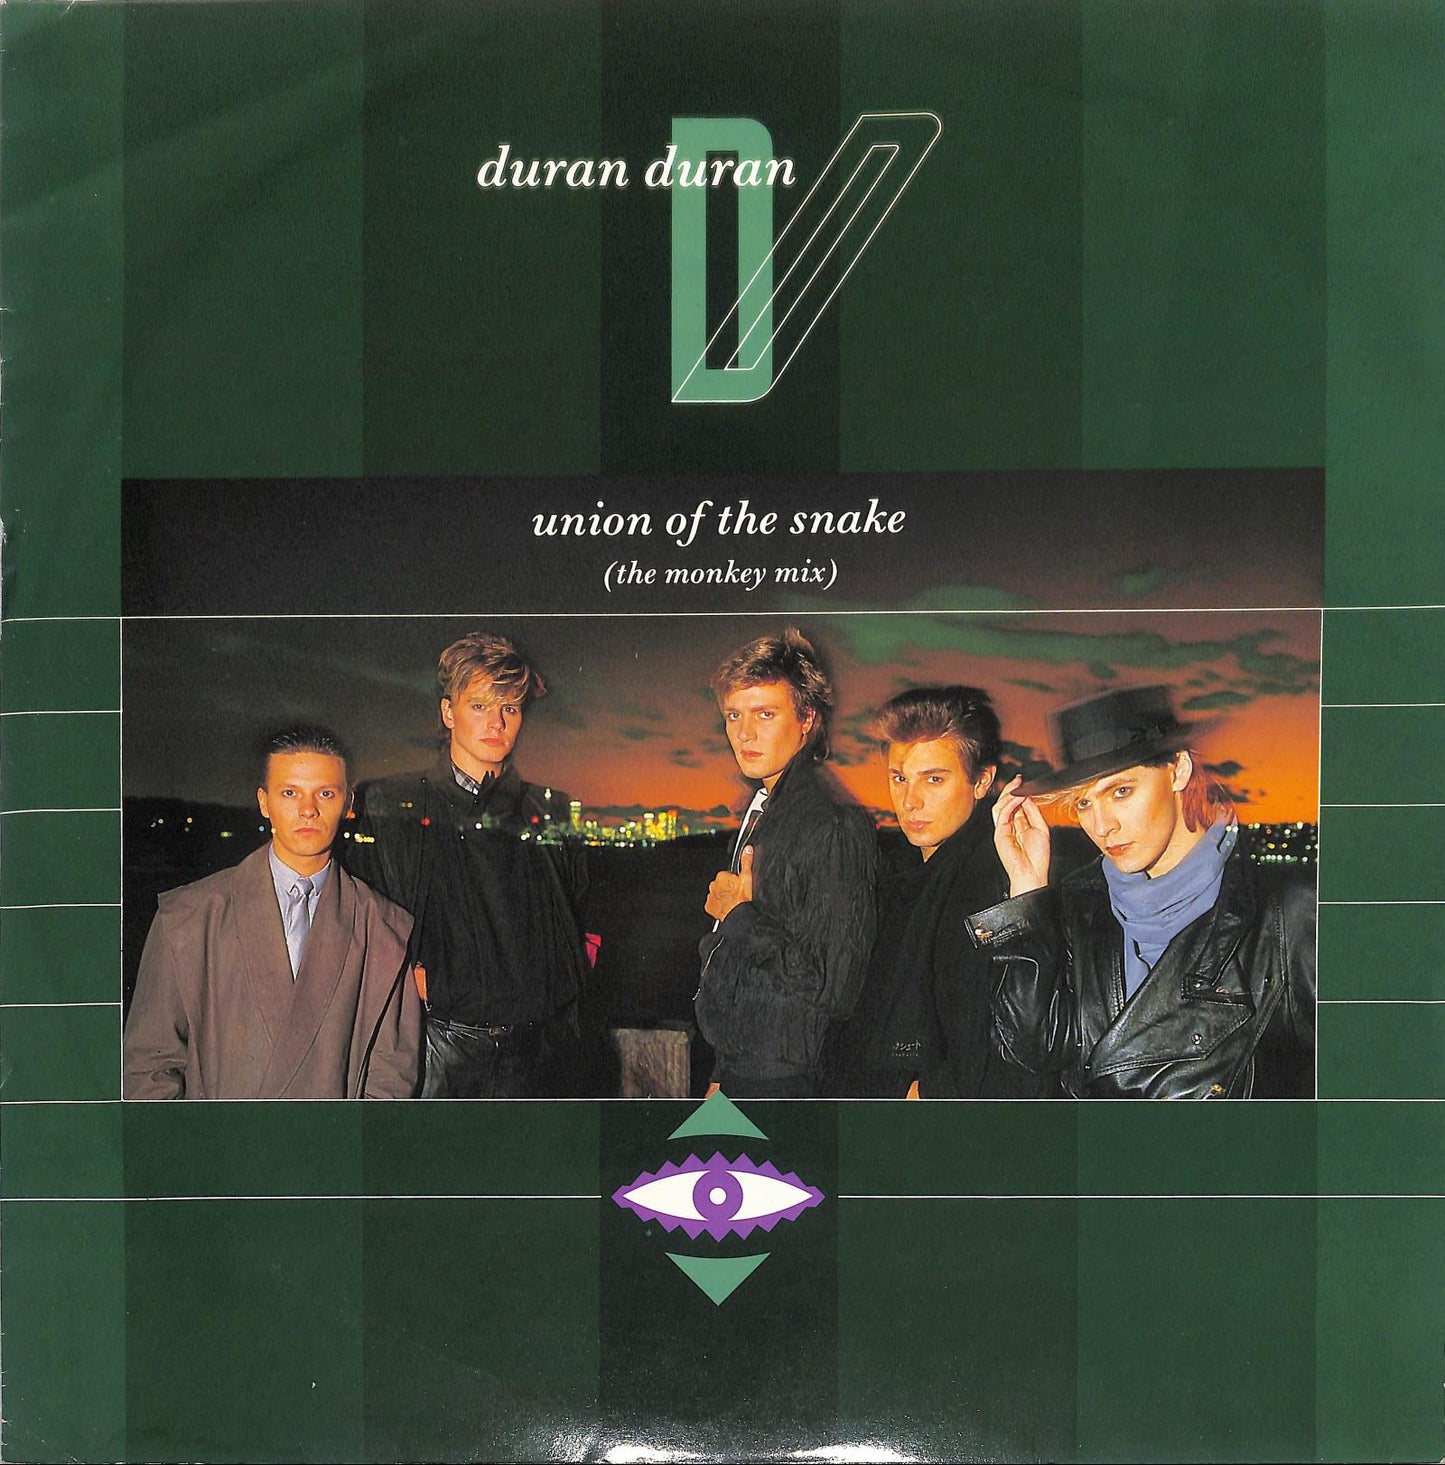 DURAN DURAN - Union Of The Snake